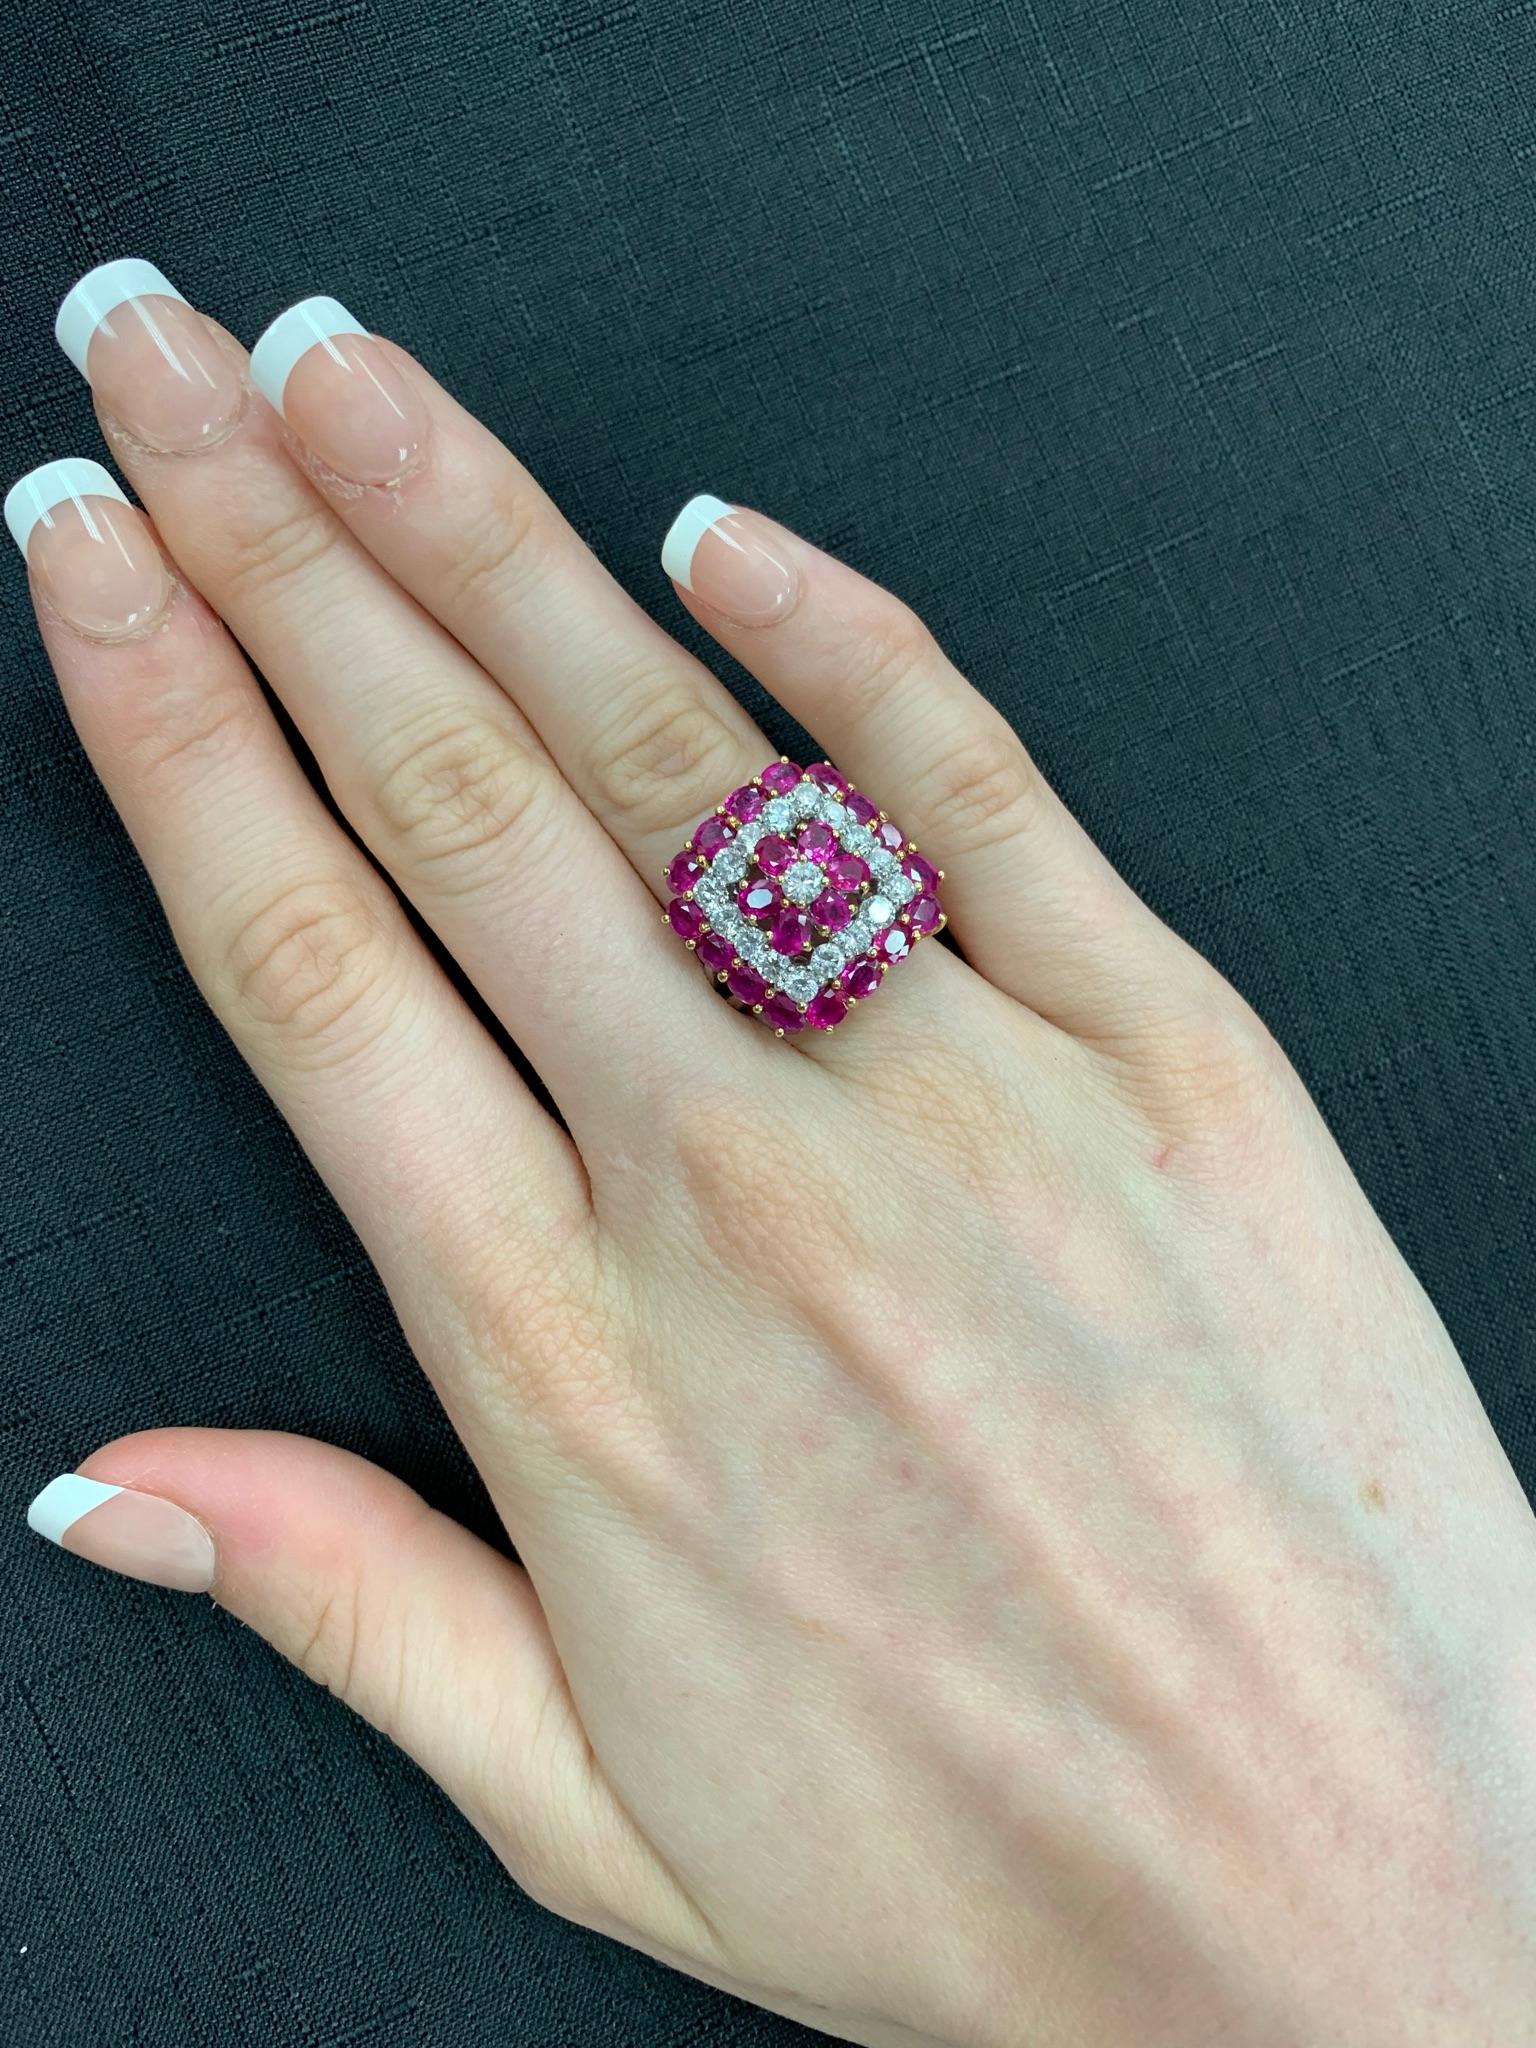 Floral-Design Round 4.19 Ct. Ruby and 1.50 Ct. Diamond Ring, Platinum & 18k Gold In Excellent Condition For Sale In New York, NY